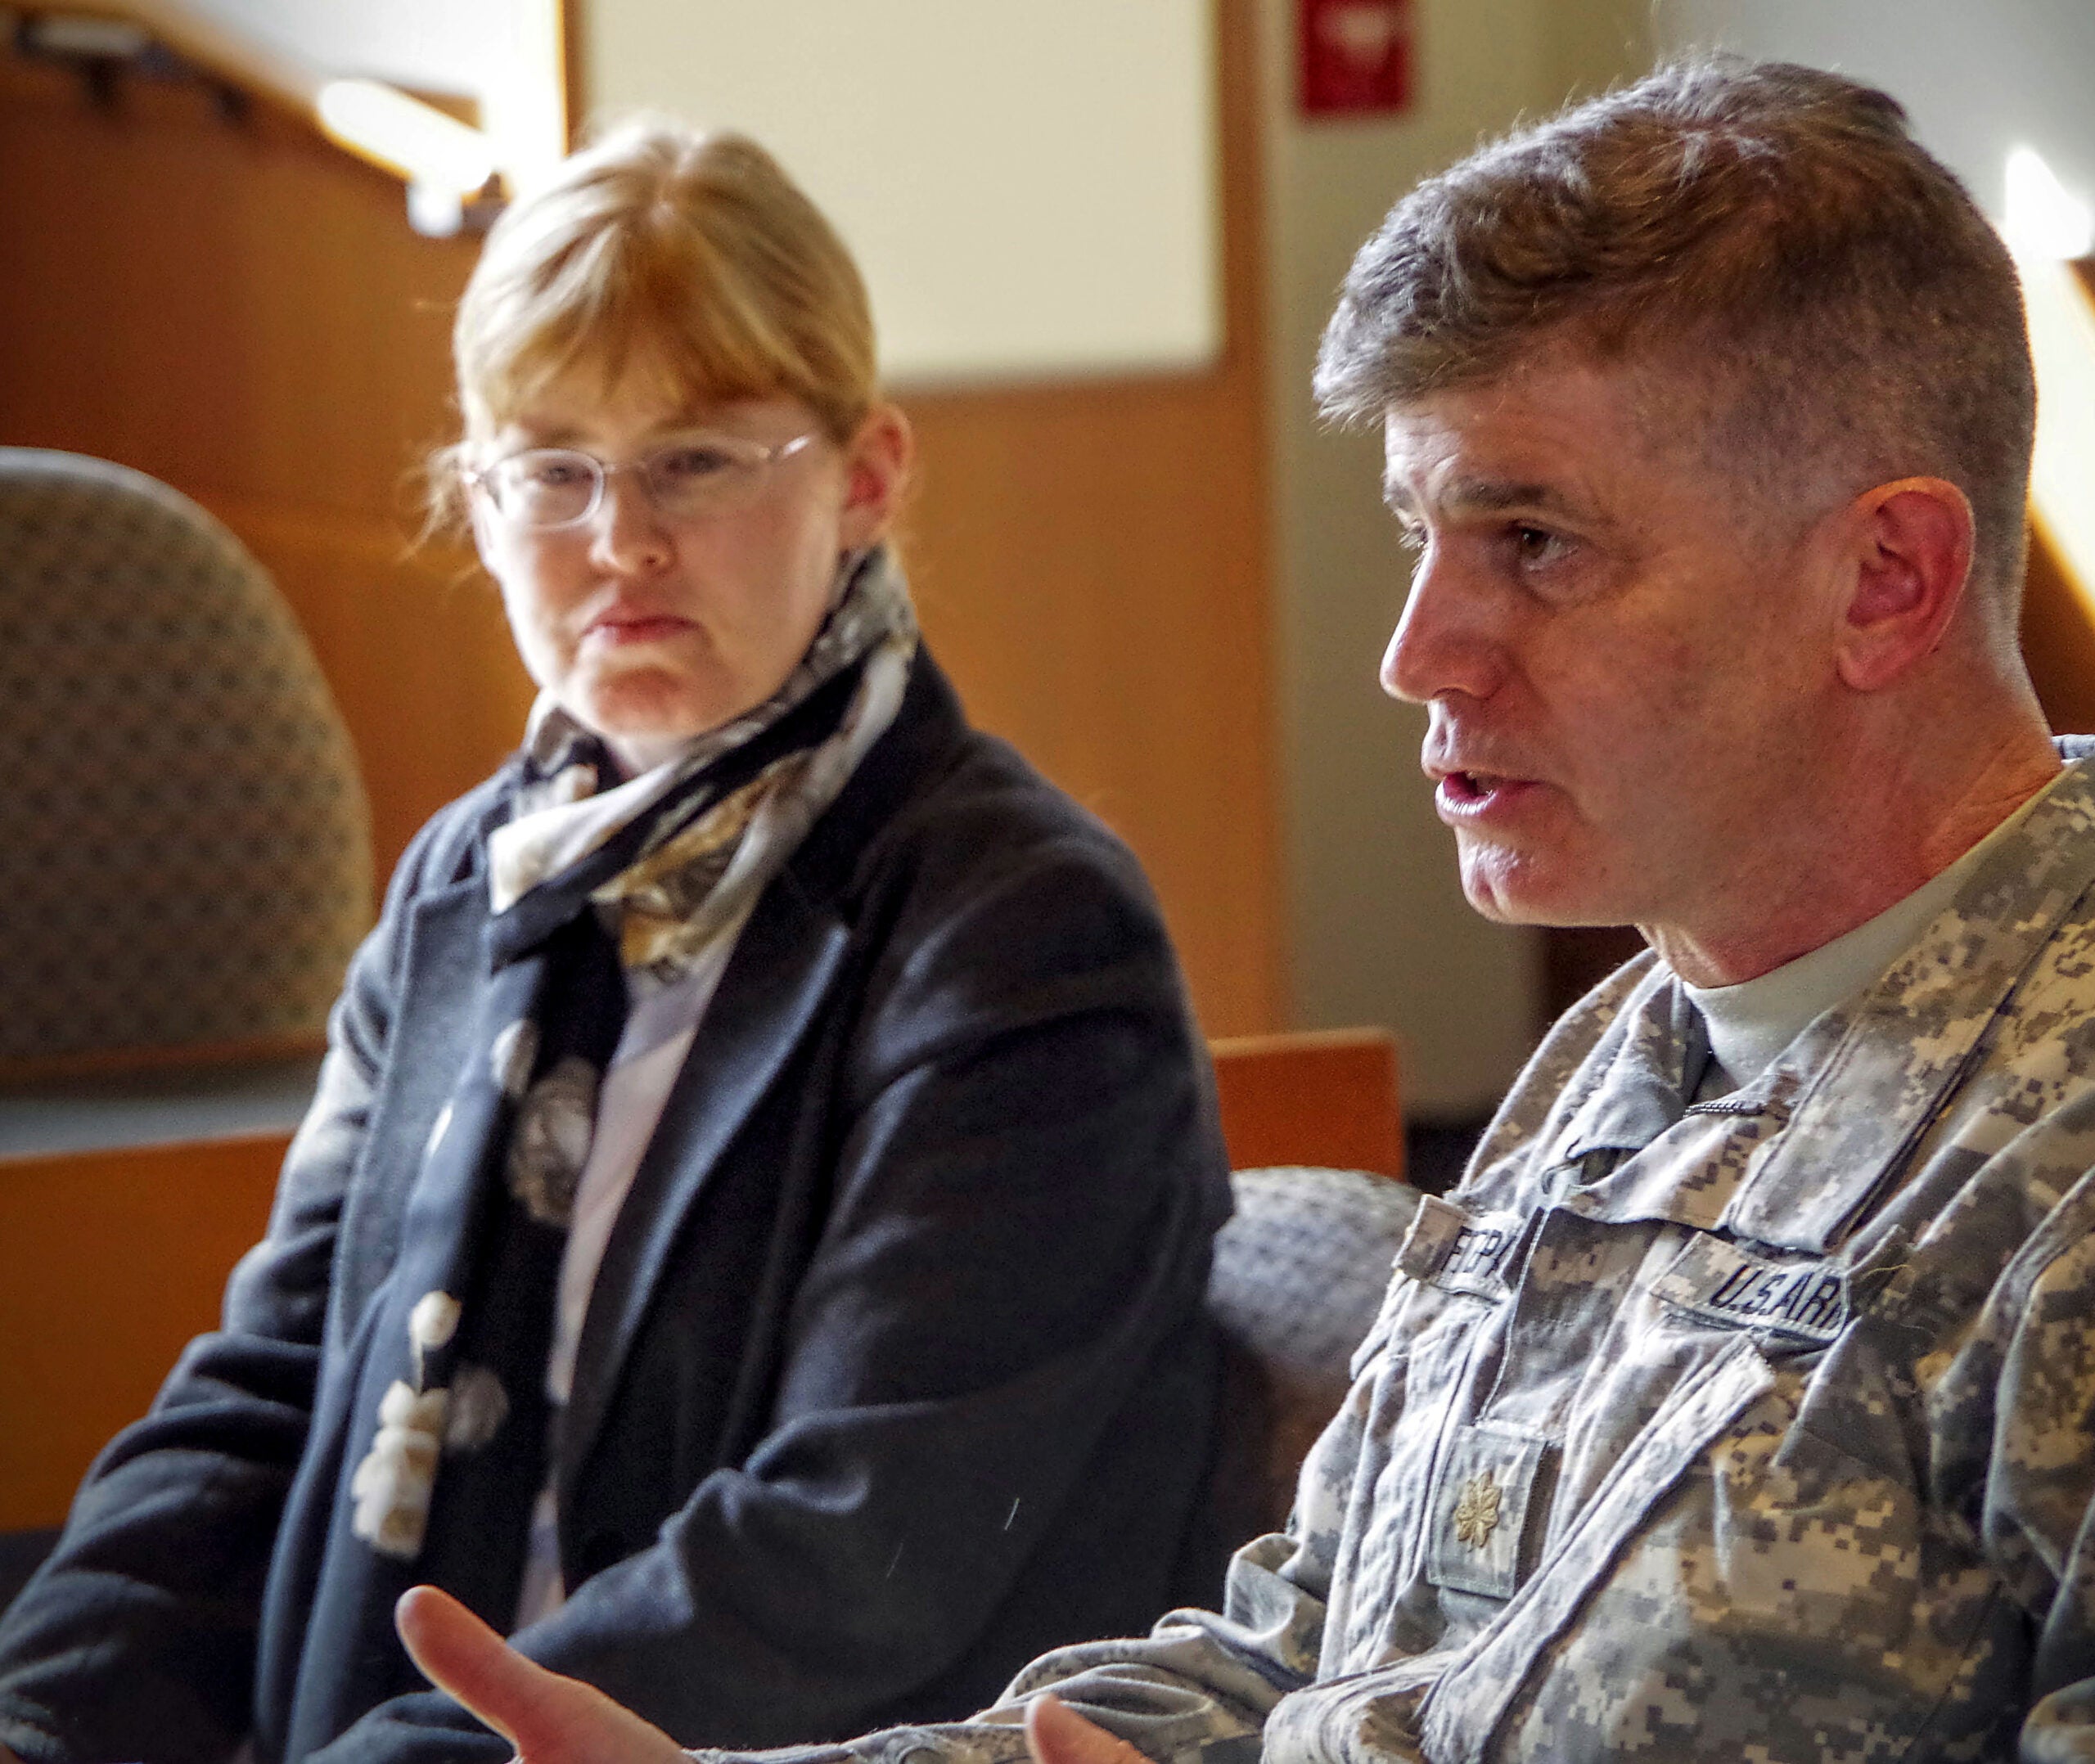 John Fitzpatrick in Army uniform speaking with an attendee watching in the background